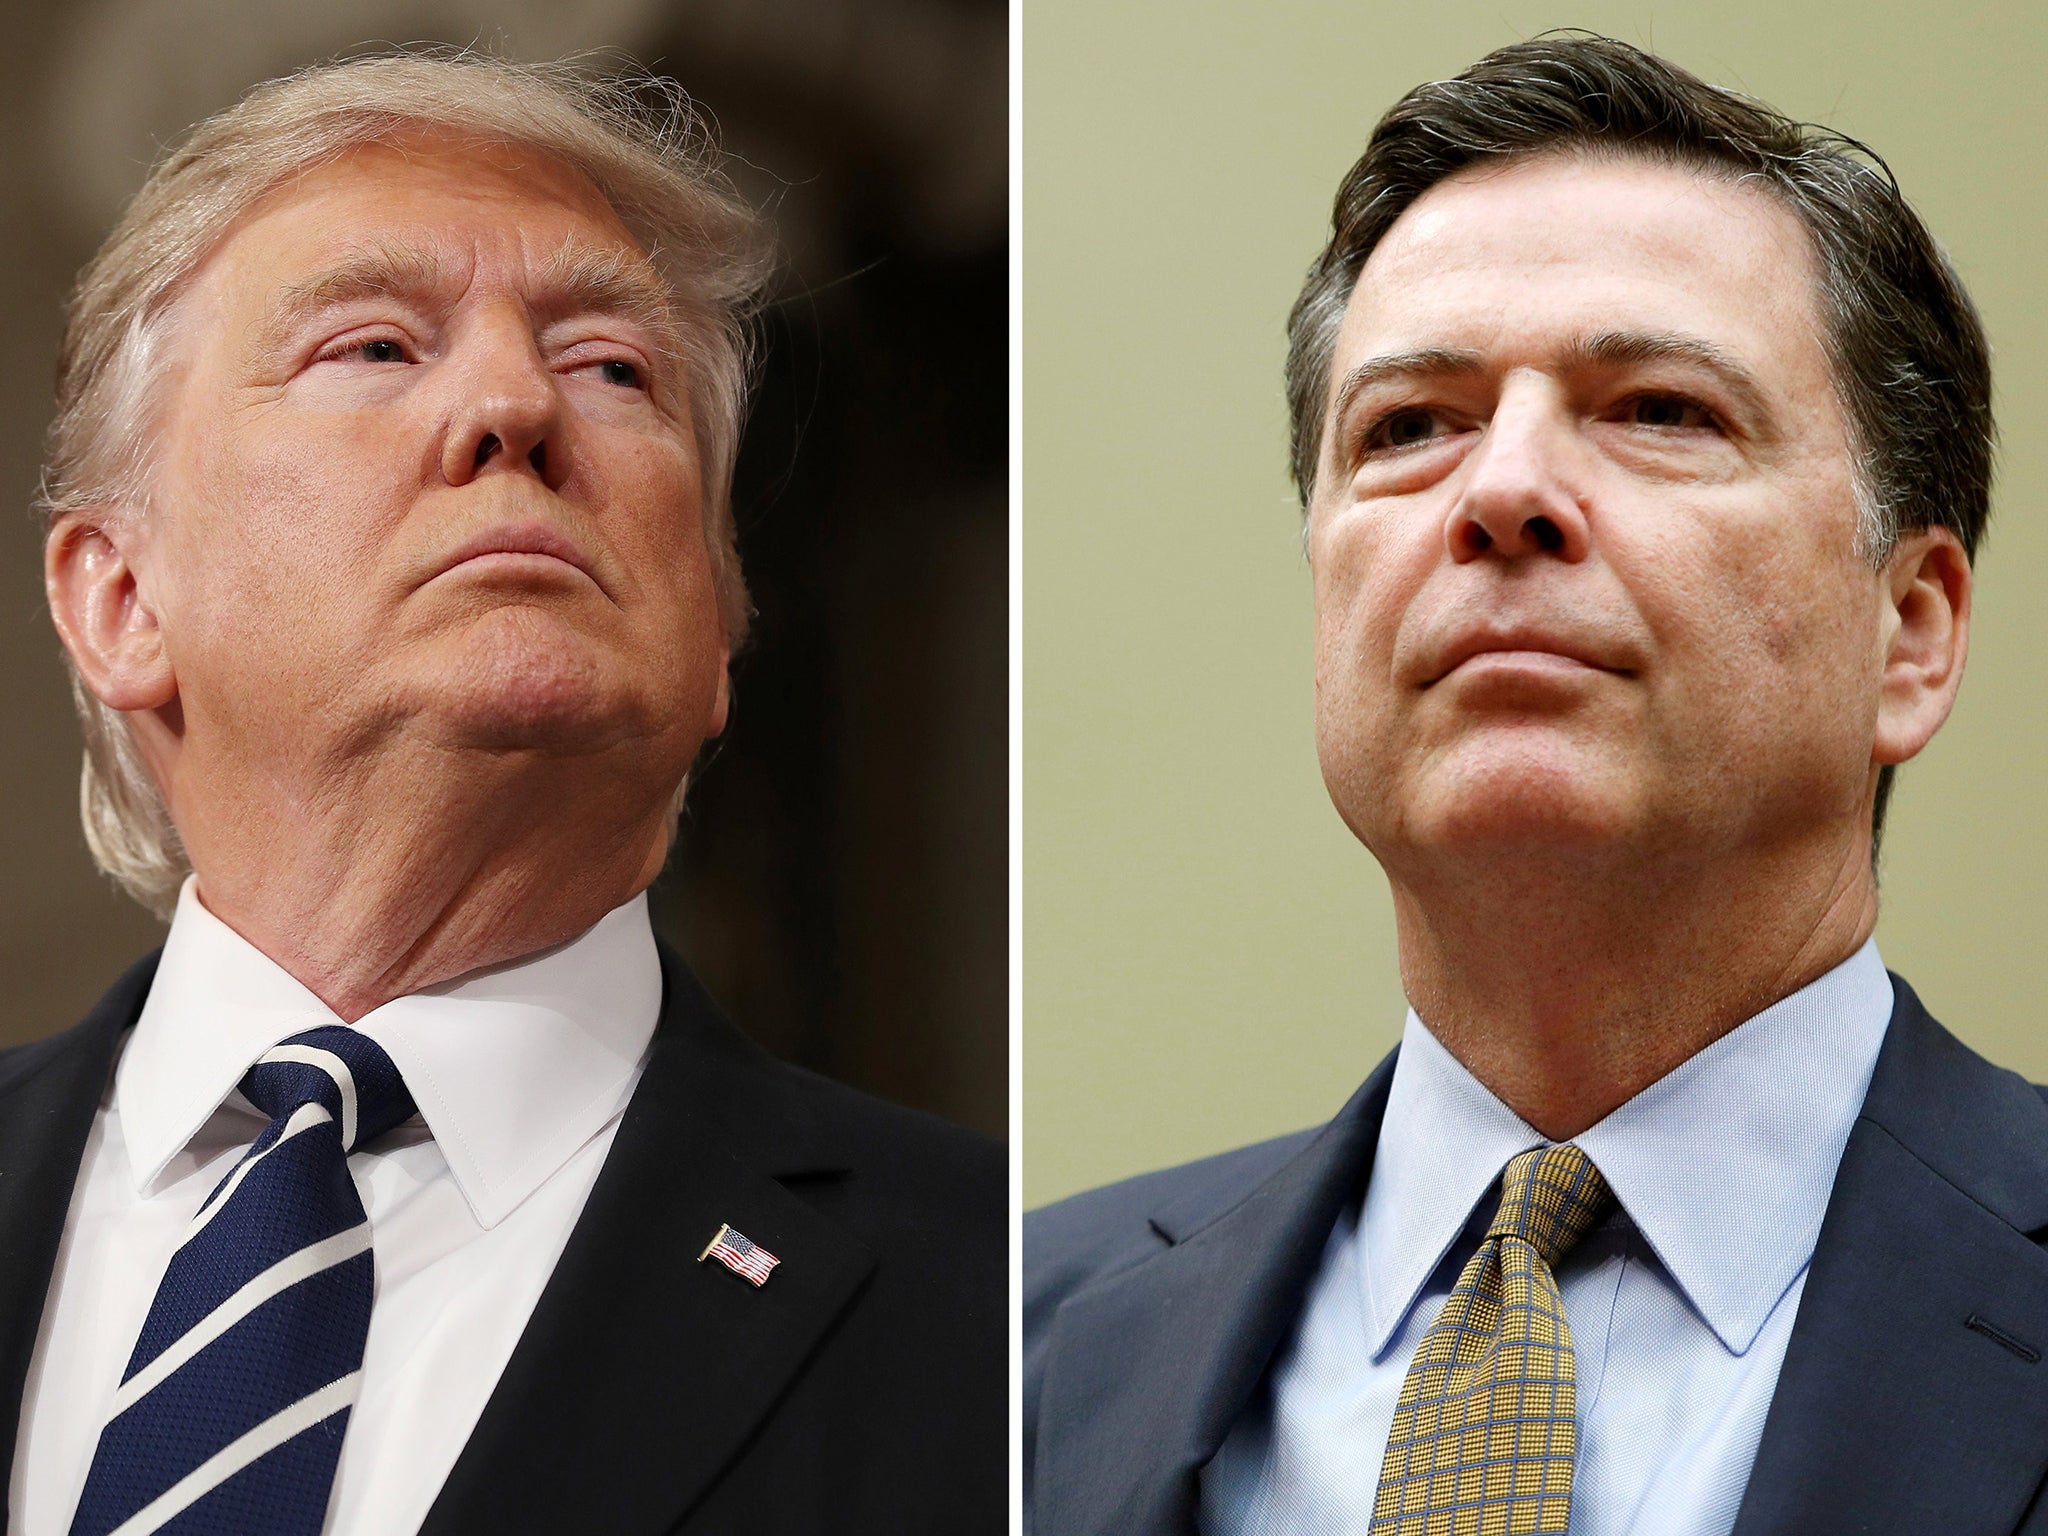 Donald Trump's shock dismissal of FBI director James Comey has heightened speculation that the Russia enquiry is coming close to uncovering explosive revelations